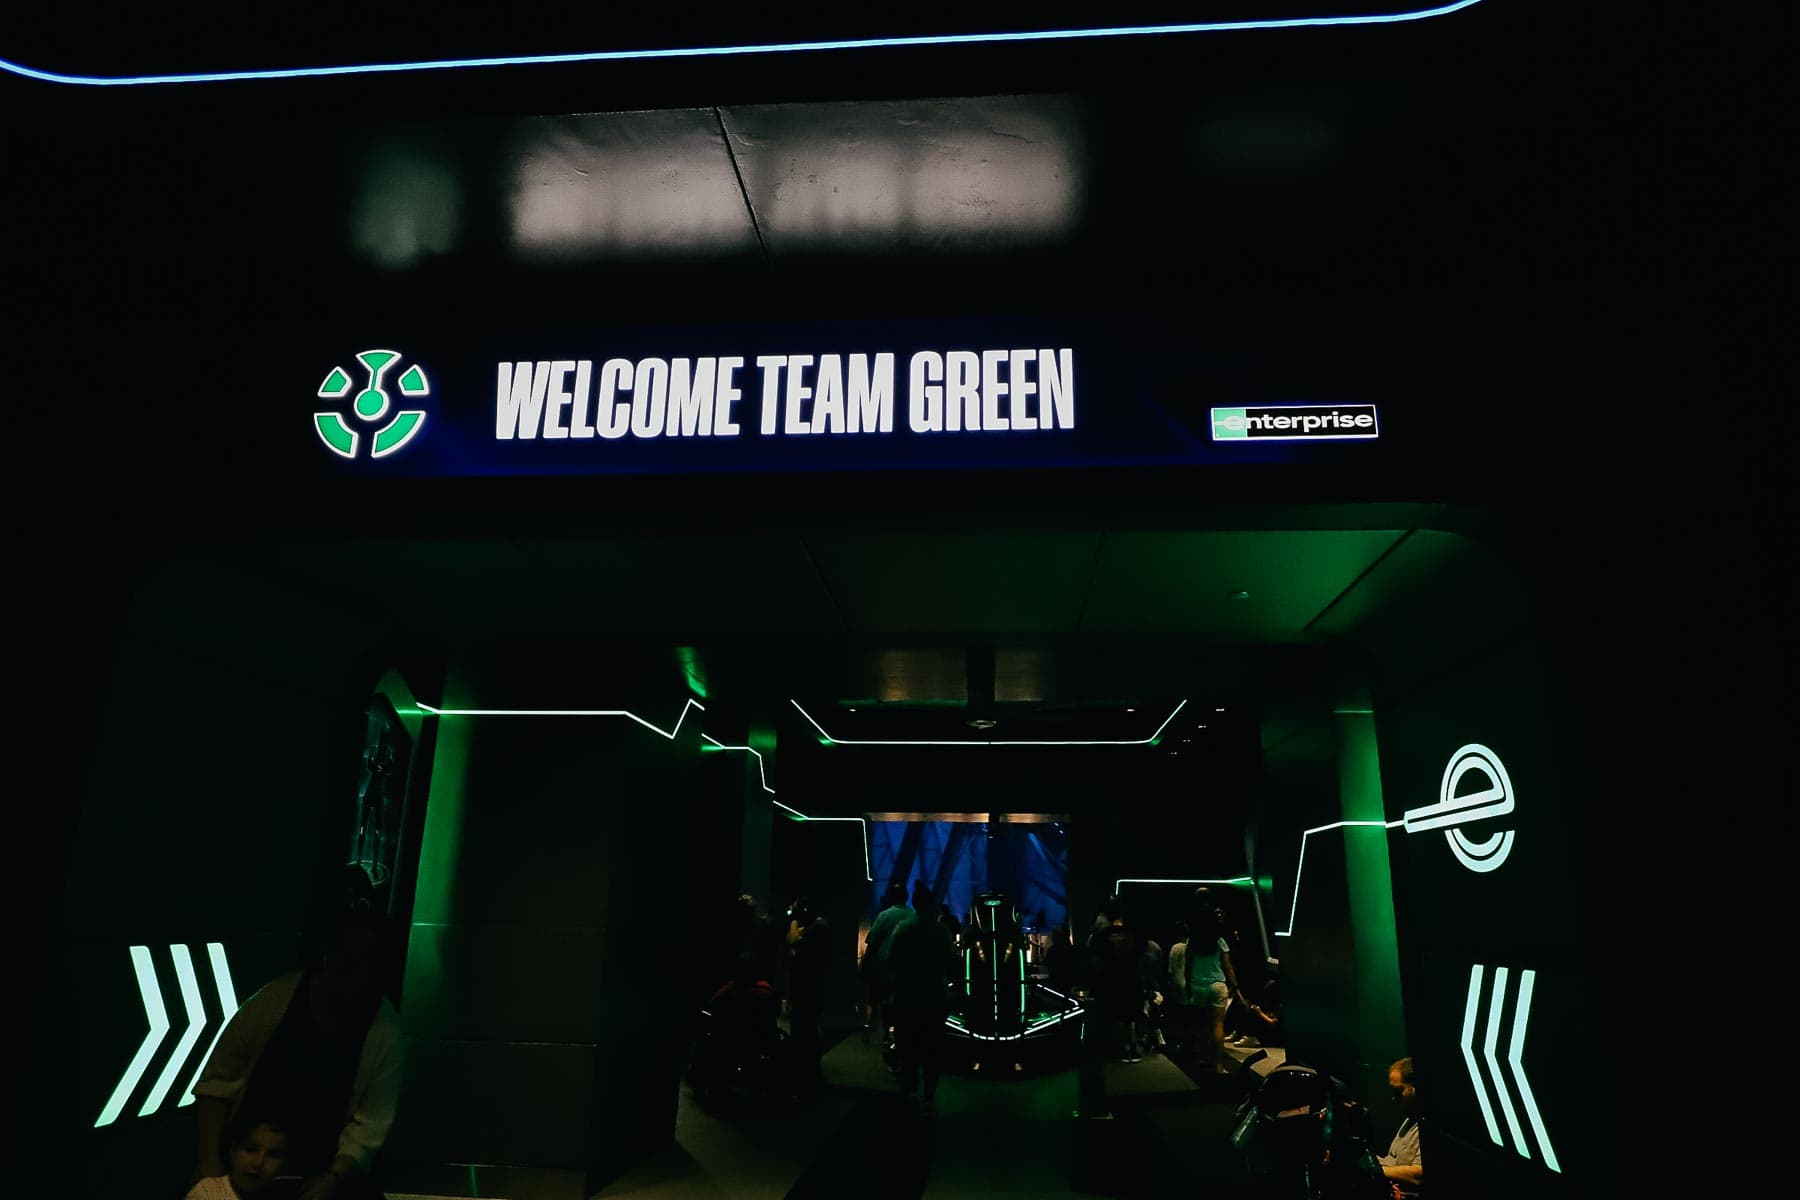 Welcome Team Green sponsored by Enterprise sign at the end of Tron. 